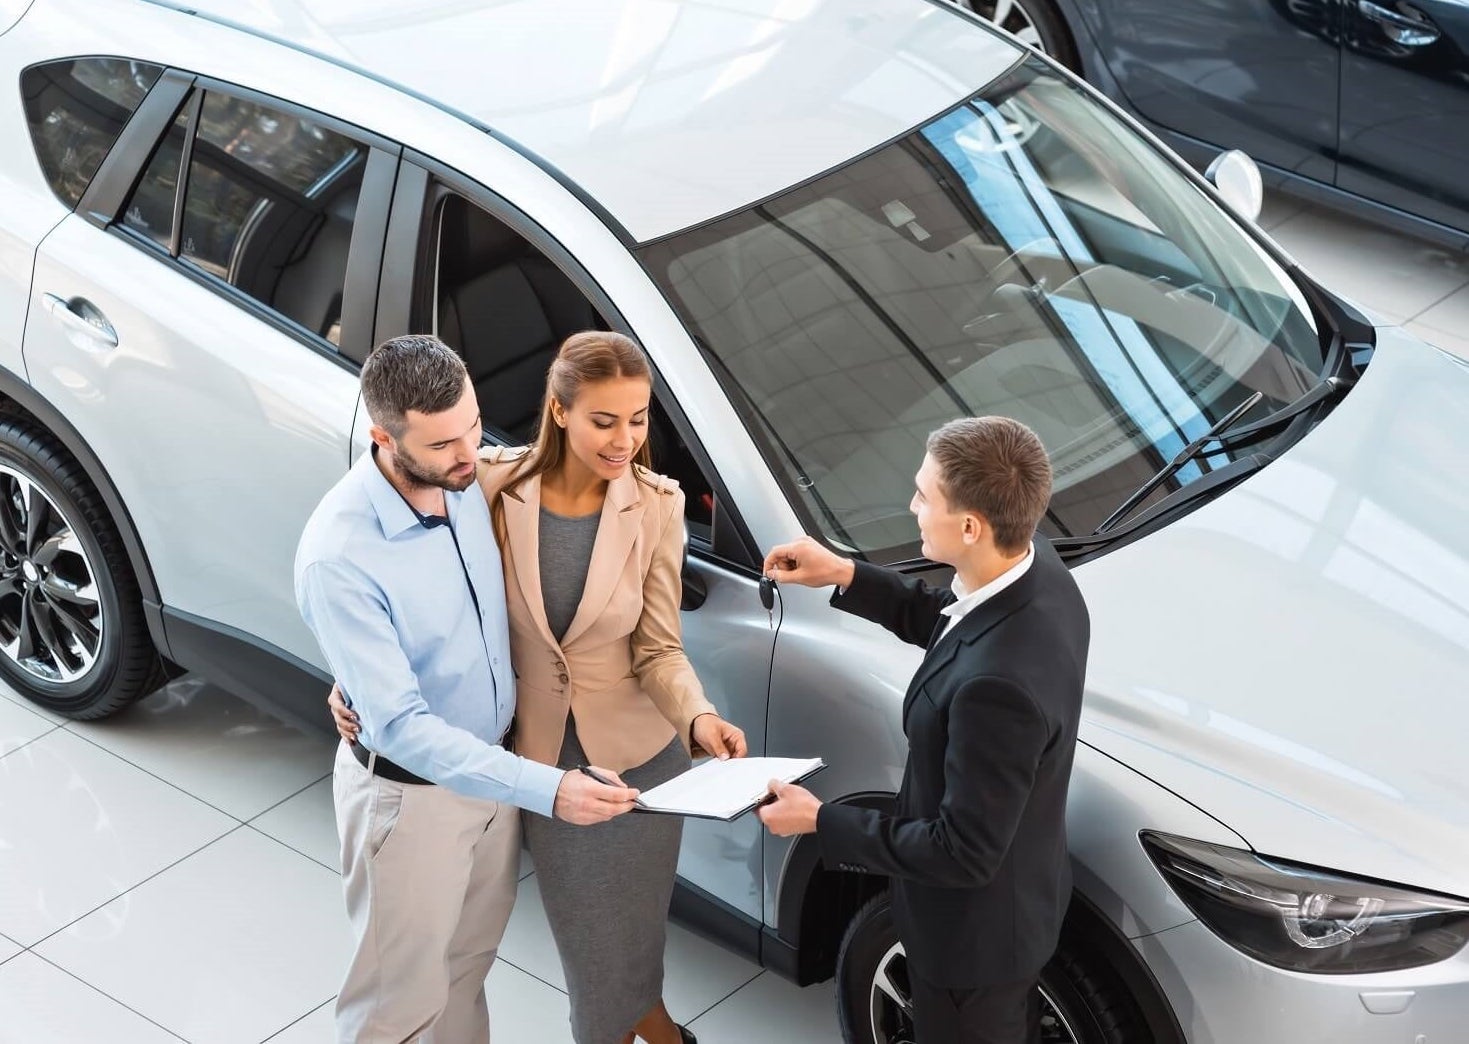 Toyota Dealer near Raleigh NC Financing and Service